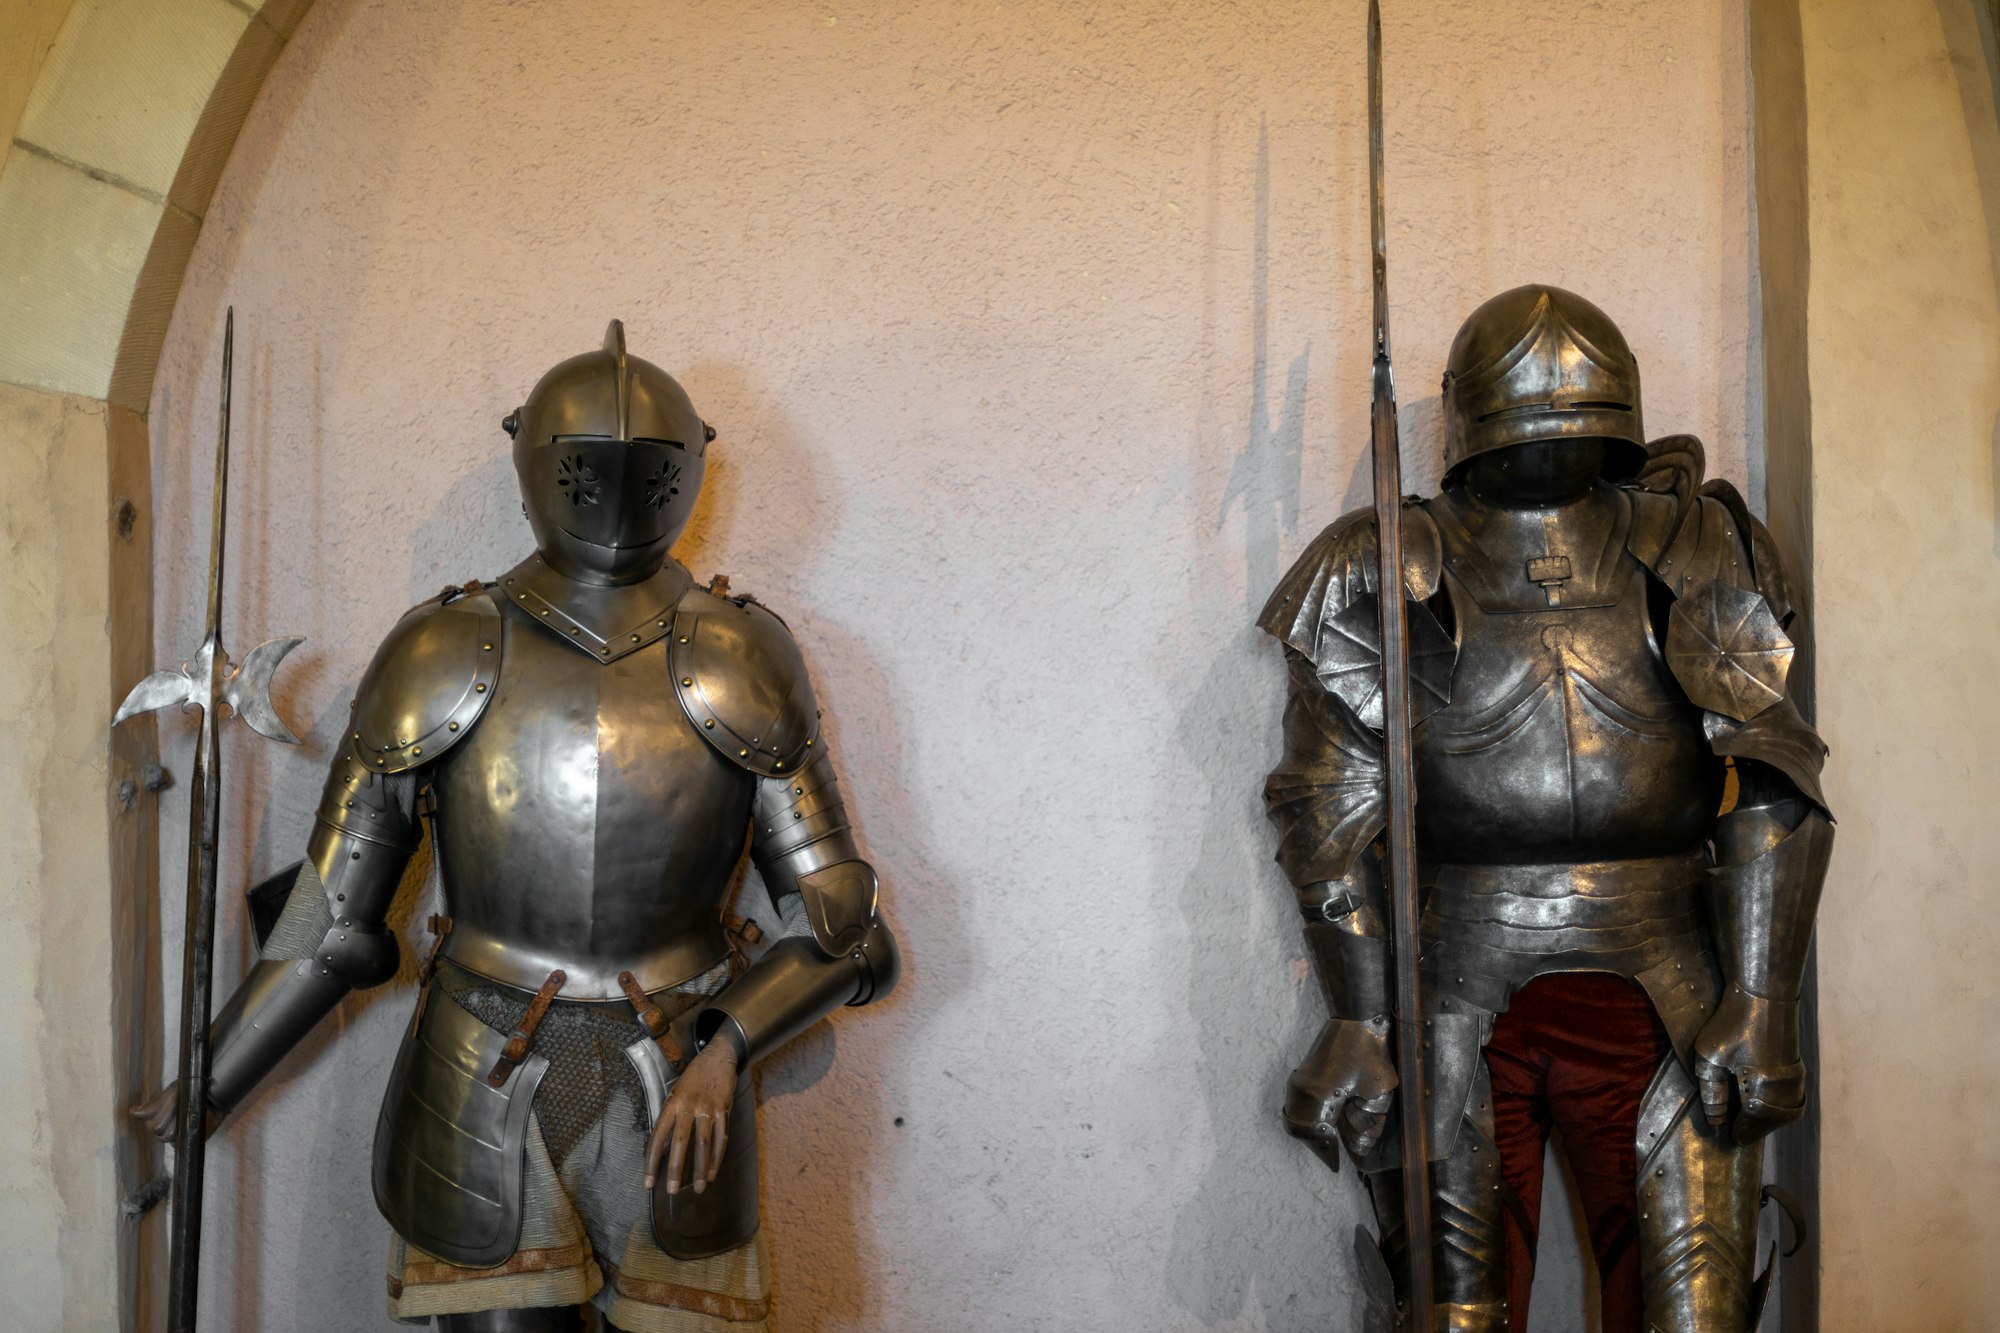 Knight's armor with a sword in a castle on the floor.